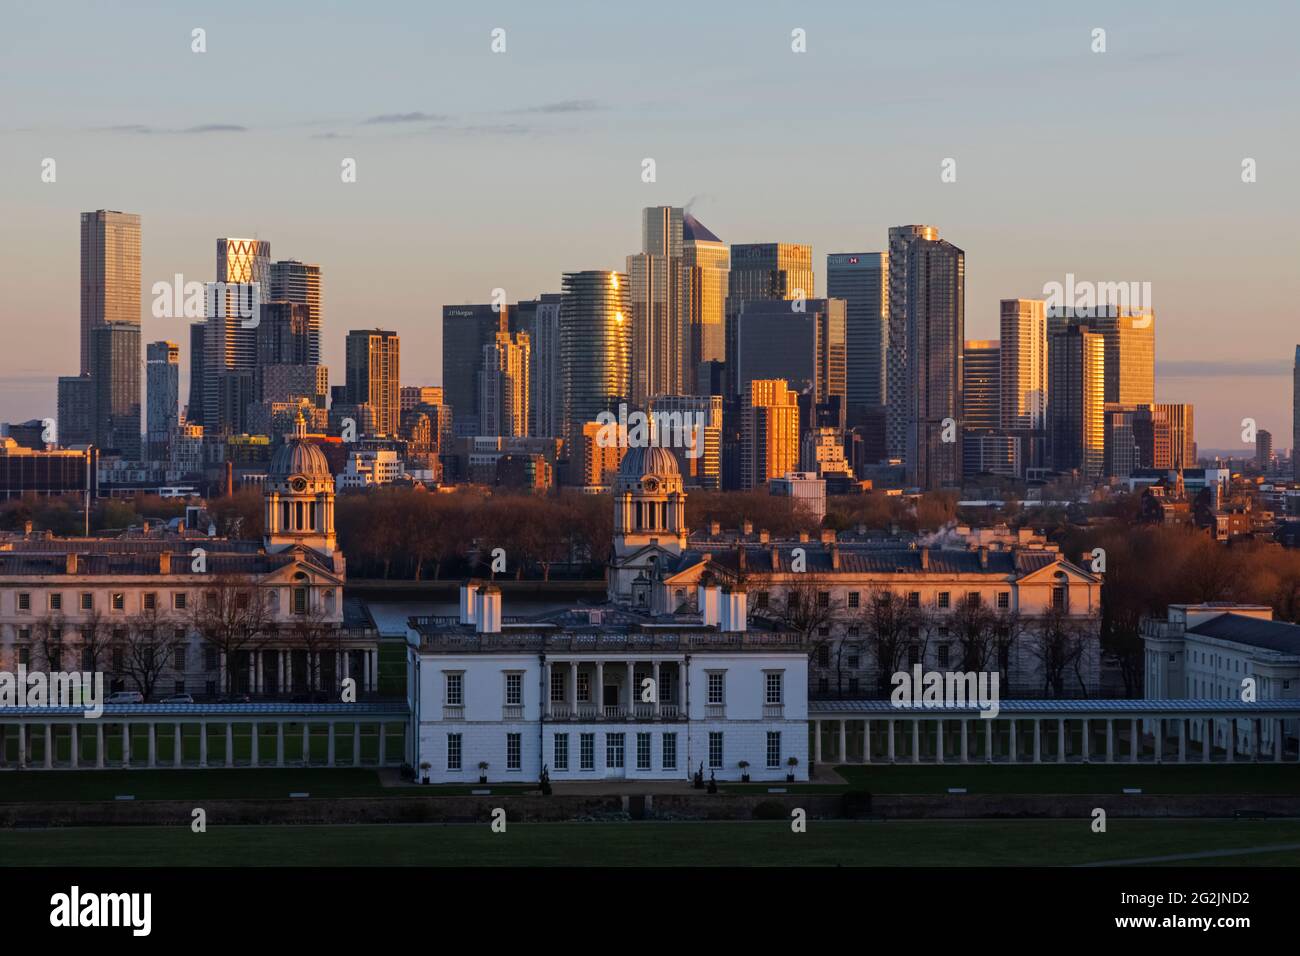 England, London, Greenwich, Canary Wharf Skyline View from Greenwich Park Stock Photo